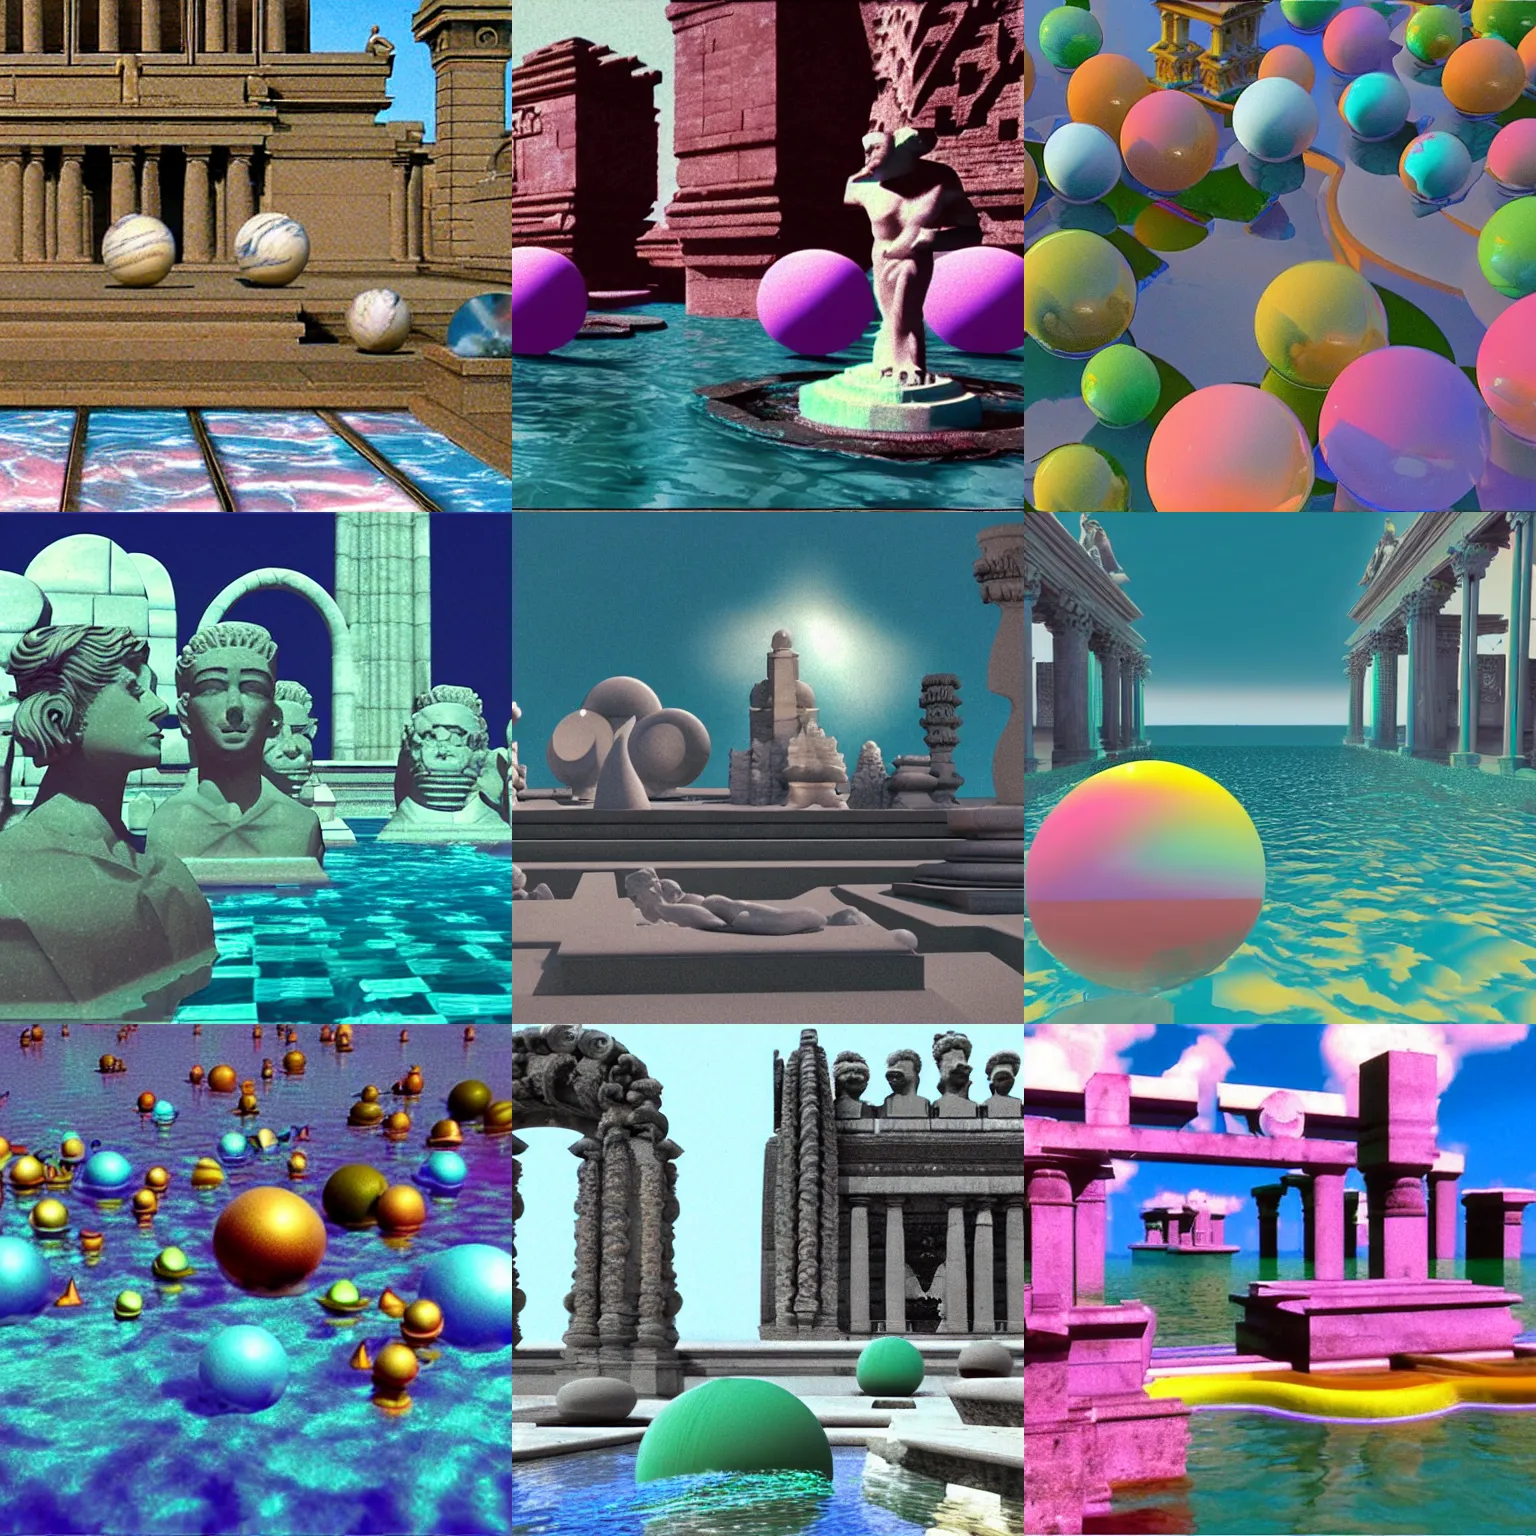 Prompt: still from a 1 9 8 3 3 d computer animation, vaporwave, constructive solid geometry, floating colorful spheres and shapes, statues, faces, water, glass, marble, chrome, stone, dolphins, temples, clouds